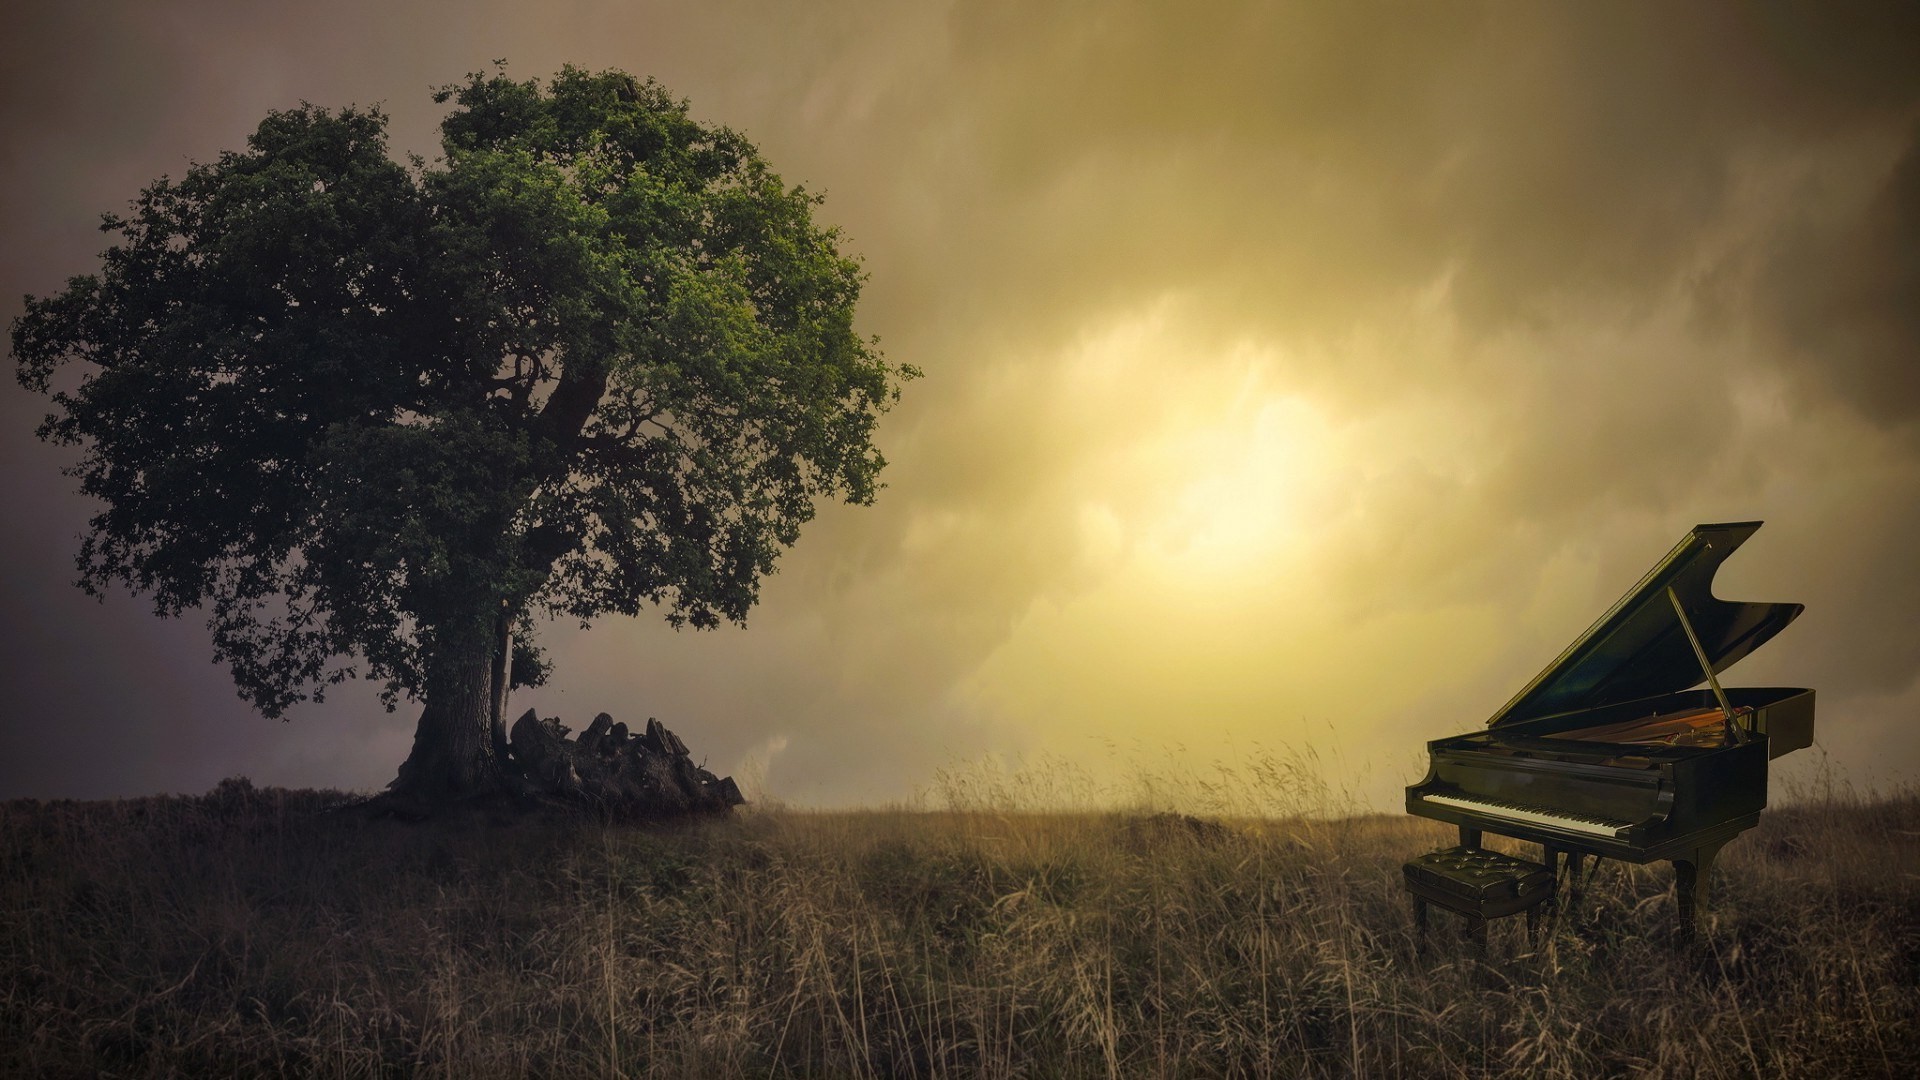 325613-nature-trees-branch-leaves-photo_manipulation-piano-field-Sun-clouds-grass-chair.jpg